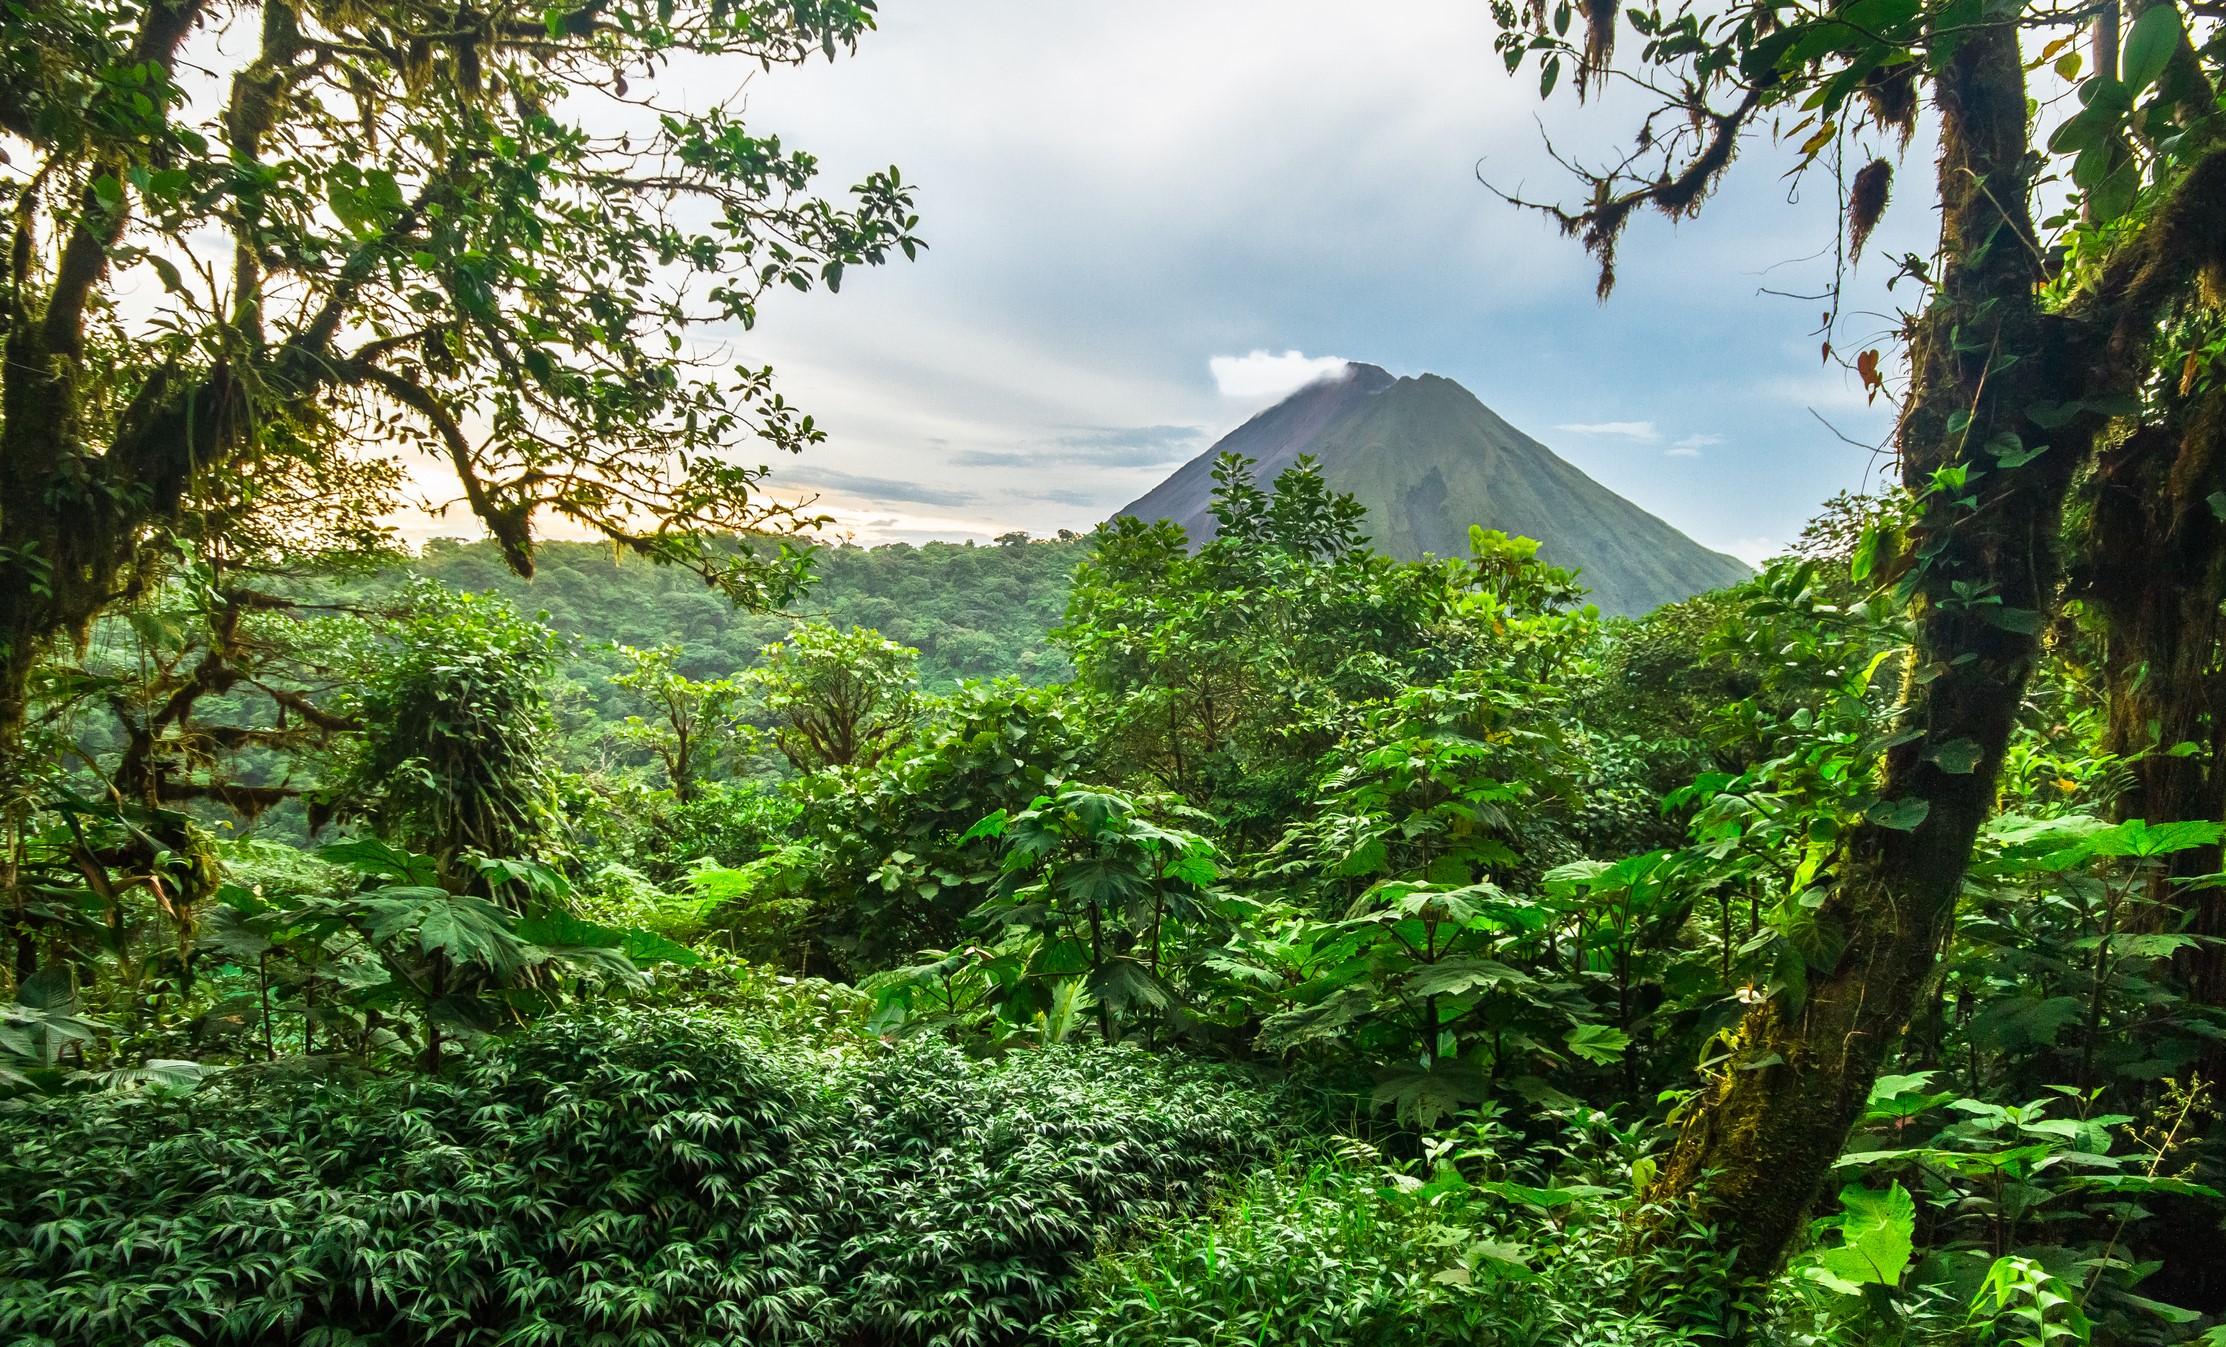 Costa Rica is aiming to become the first carbon neutrak country